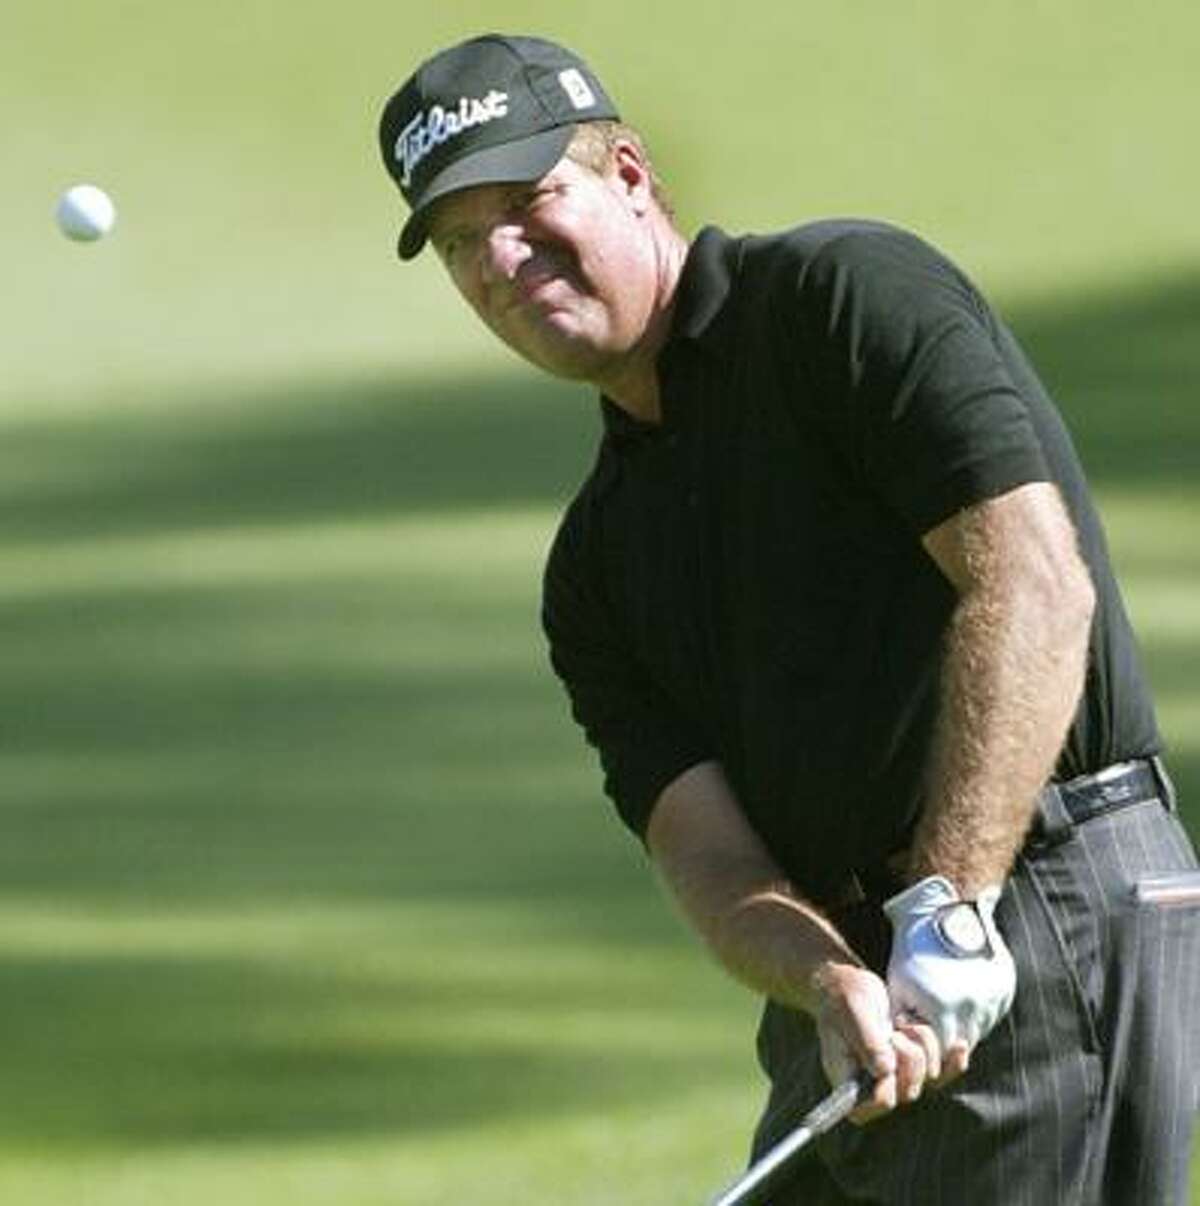 Steve Elkington, of Australia, chips to the green on the second hole during the third round of the Players Championship, Saturday, March 27, 2004, in Ponte Vedra Beach, Fla. (AP)